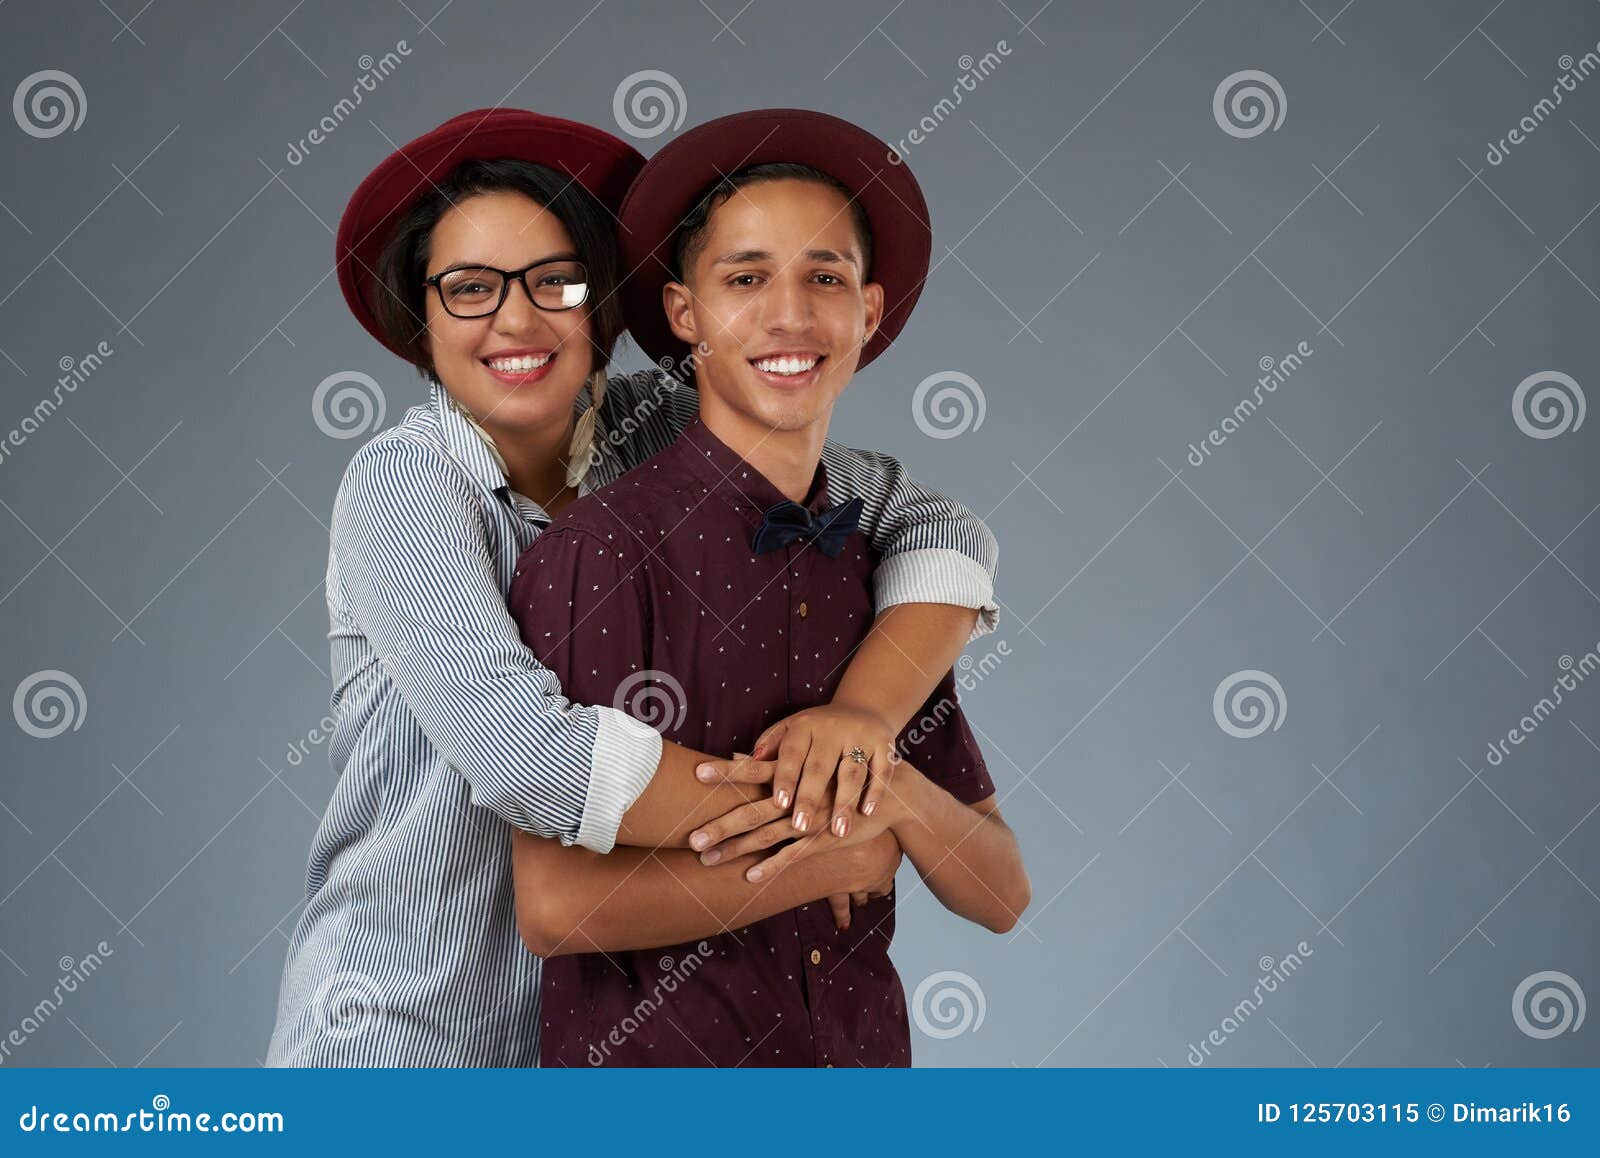 https://thumbs.dreamstime.com/z/young-latin-couple-young-latin-couple-smile-teeth-hugging-isolated-gray-studio-background-125703115.jpg